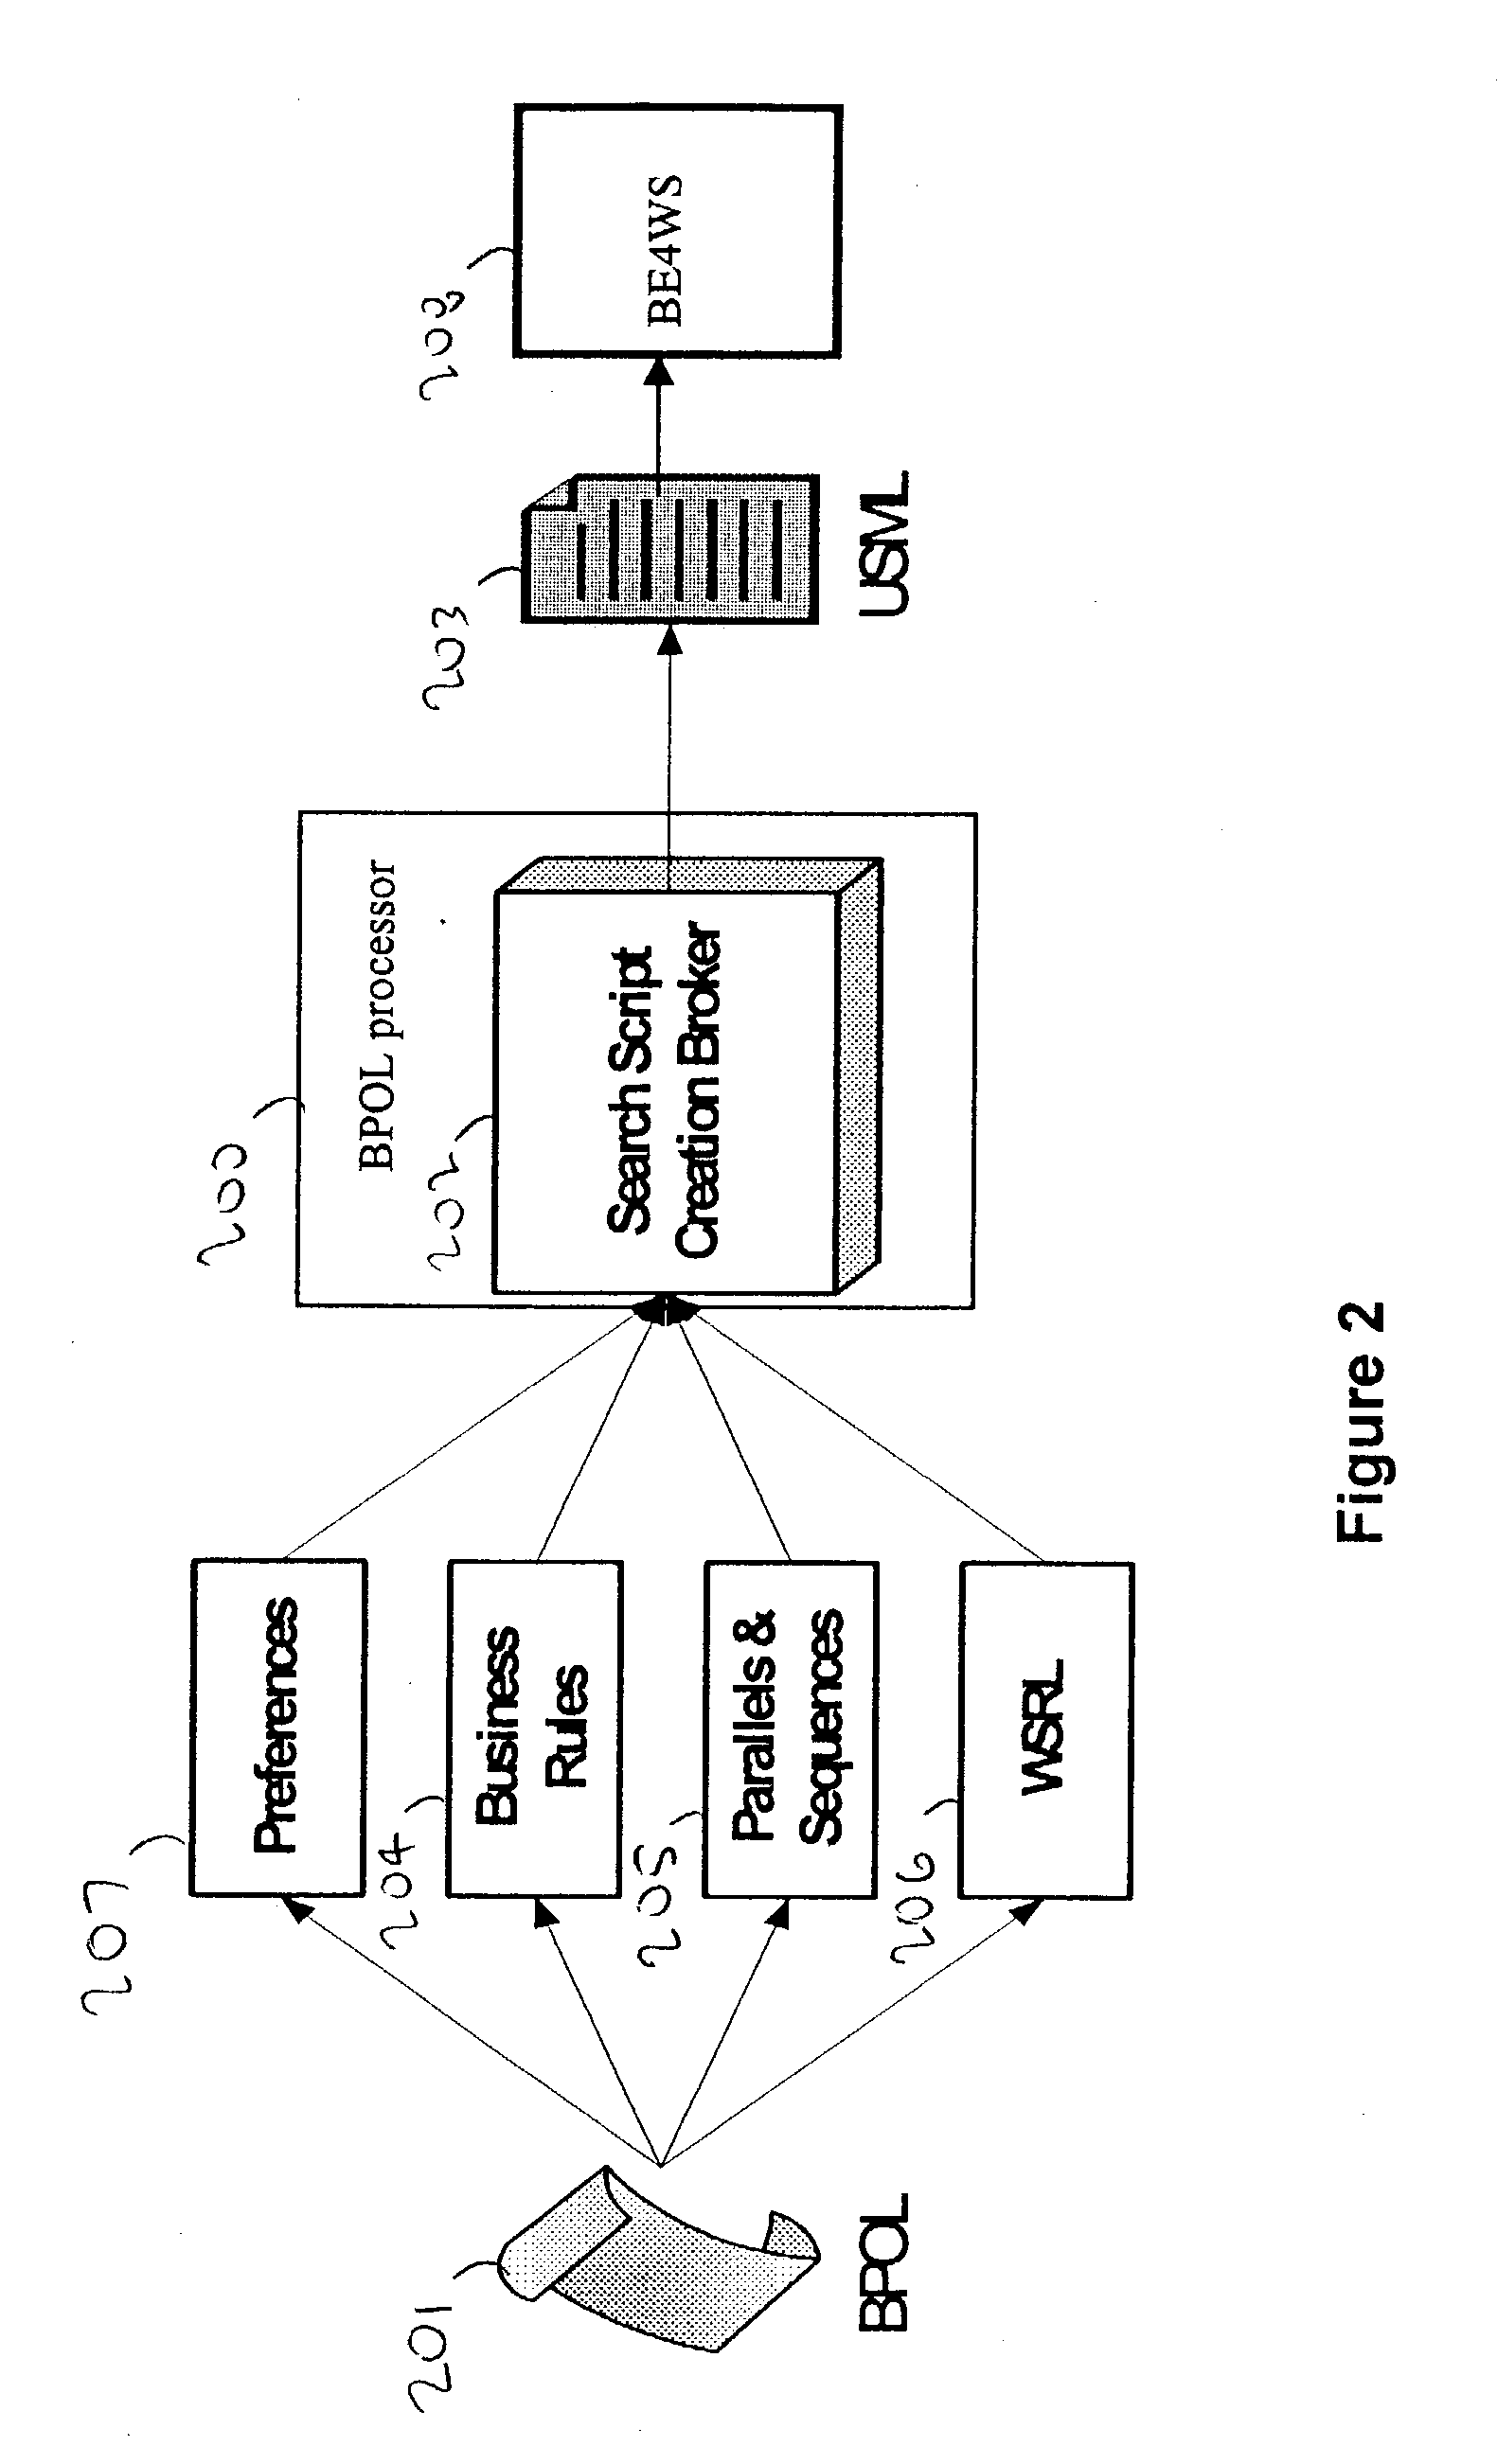 System and method of dynamic service composition for business process outsourcing